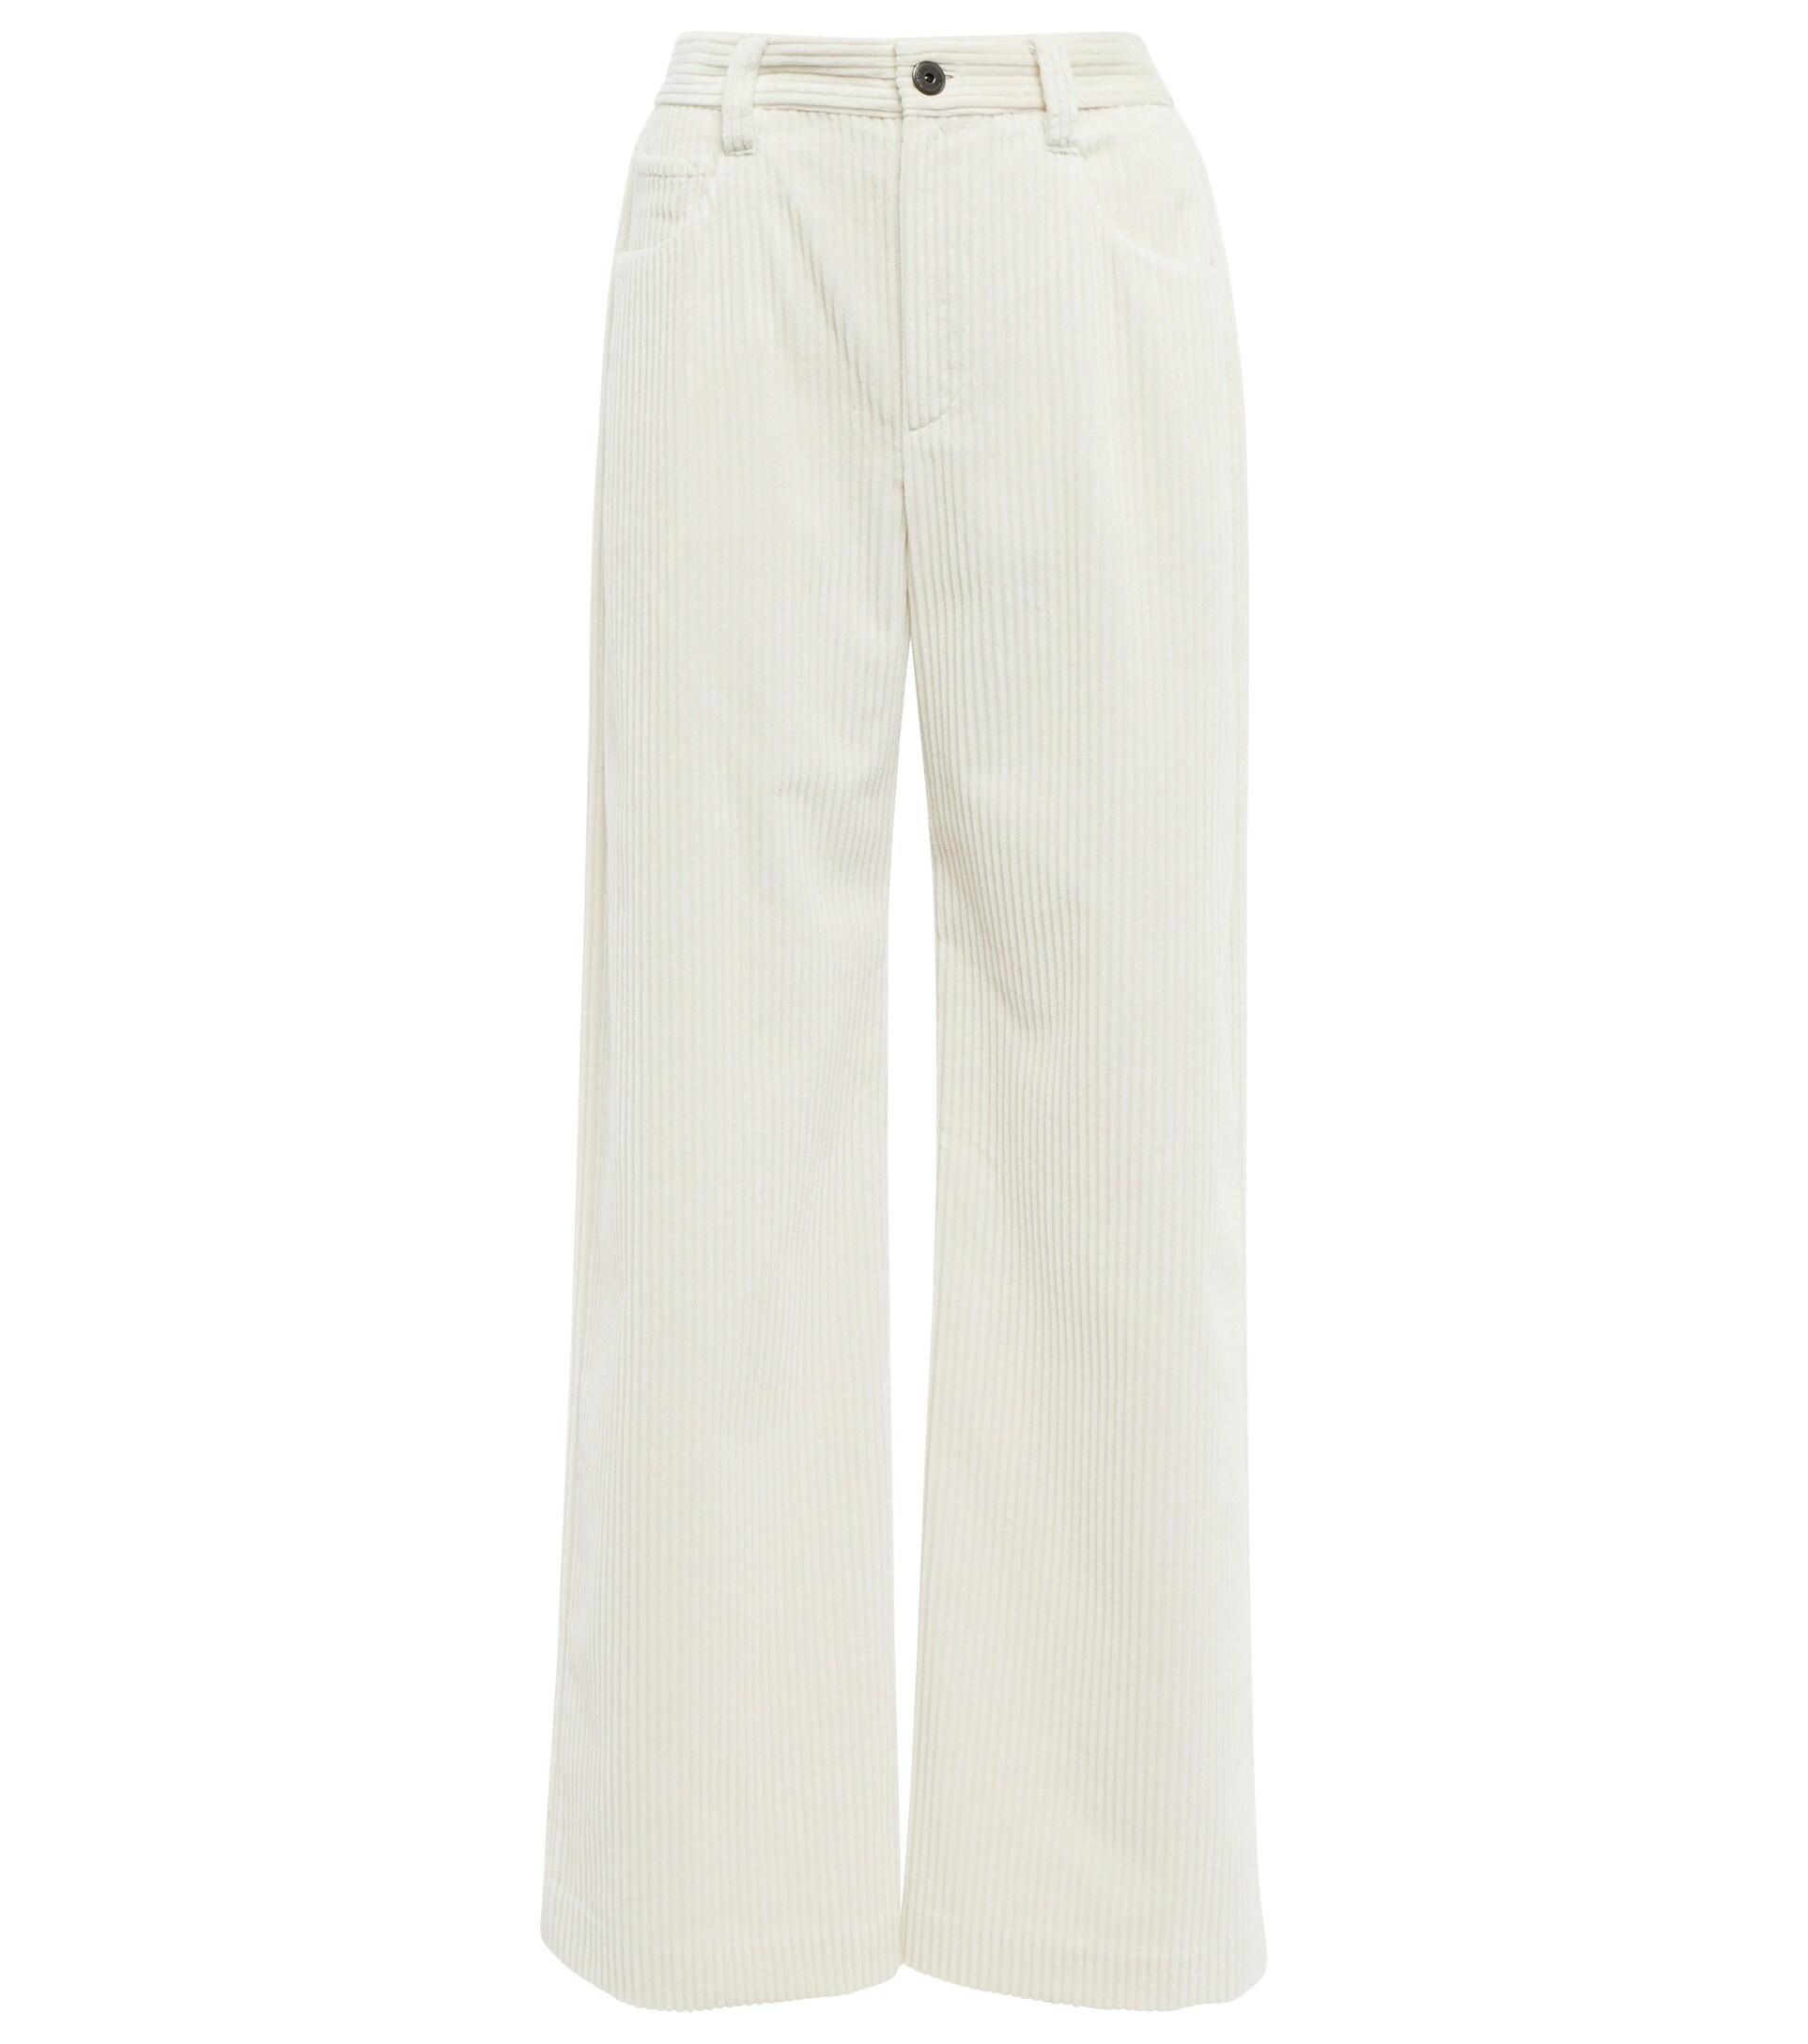 Brunello Cucinelli High-rise Corduroy Pants in White | Lyst